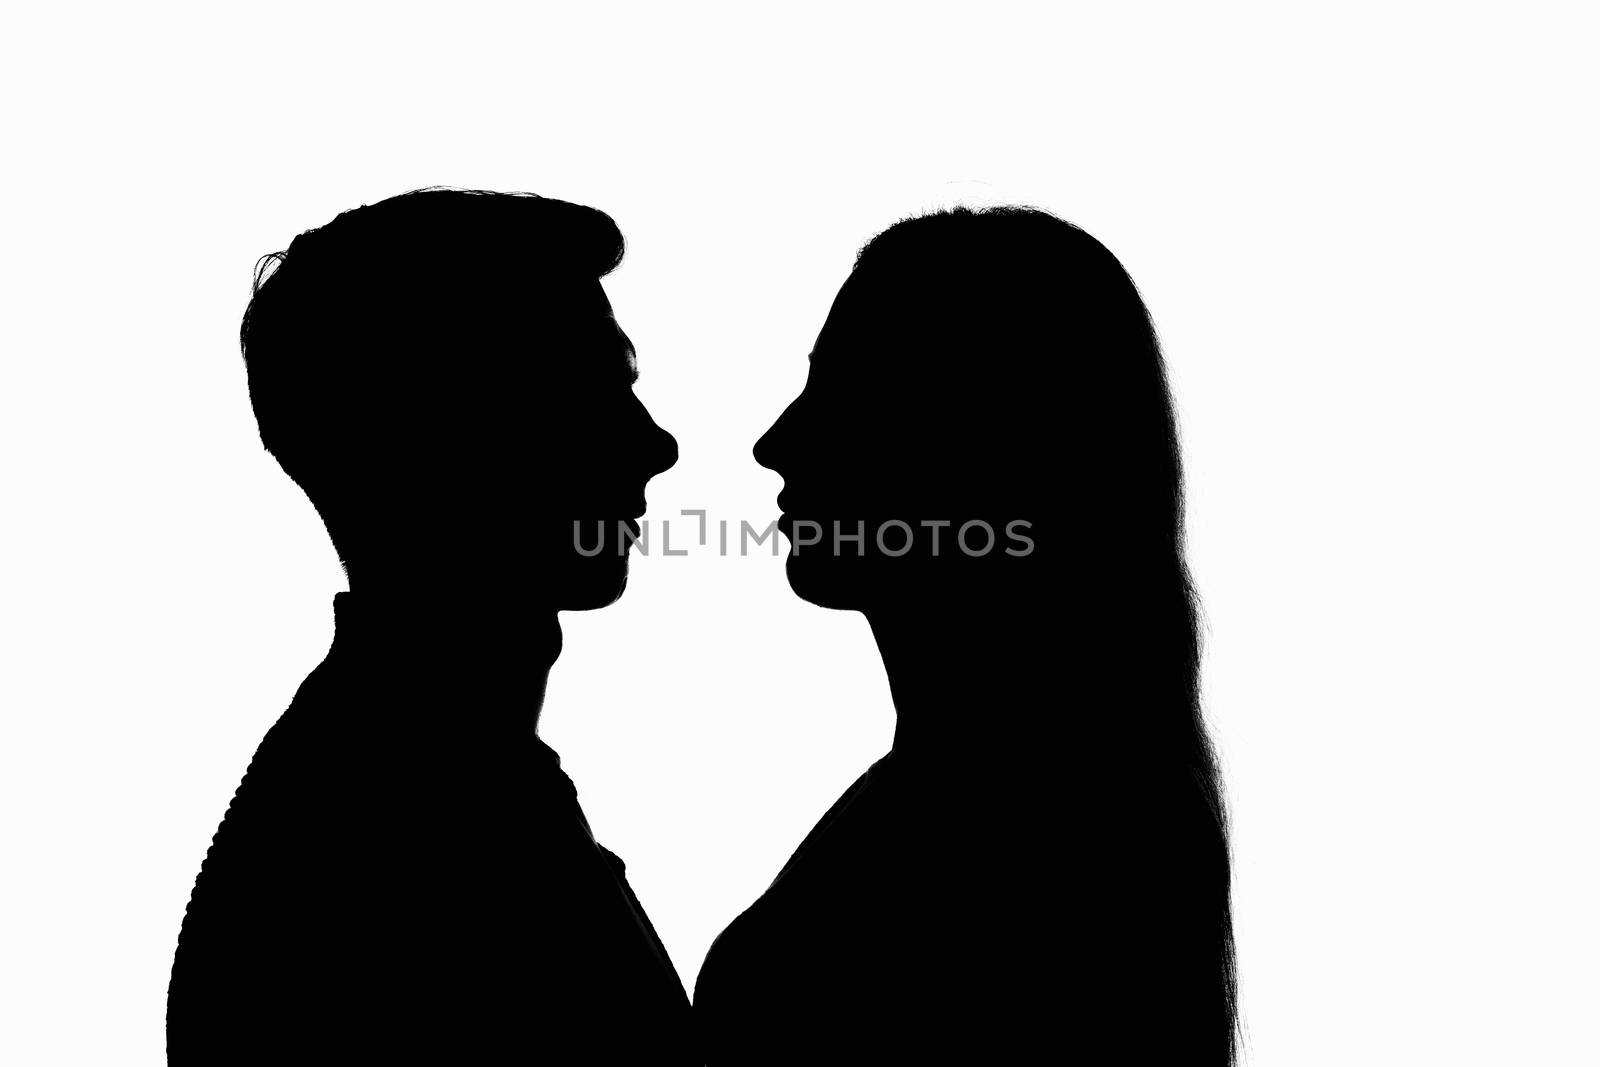 Images of two people right in front of each other